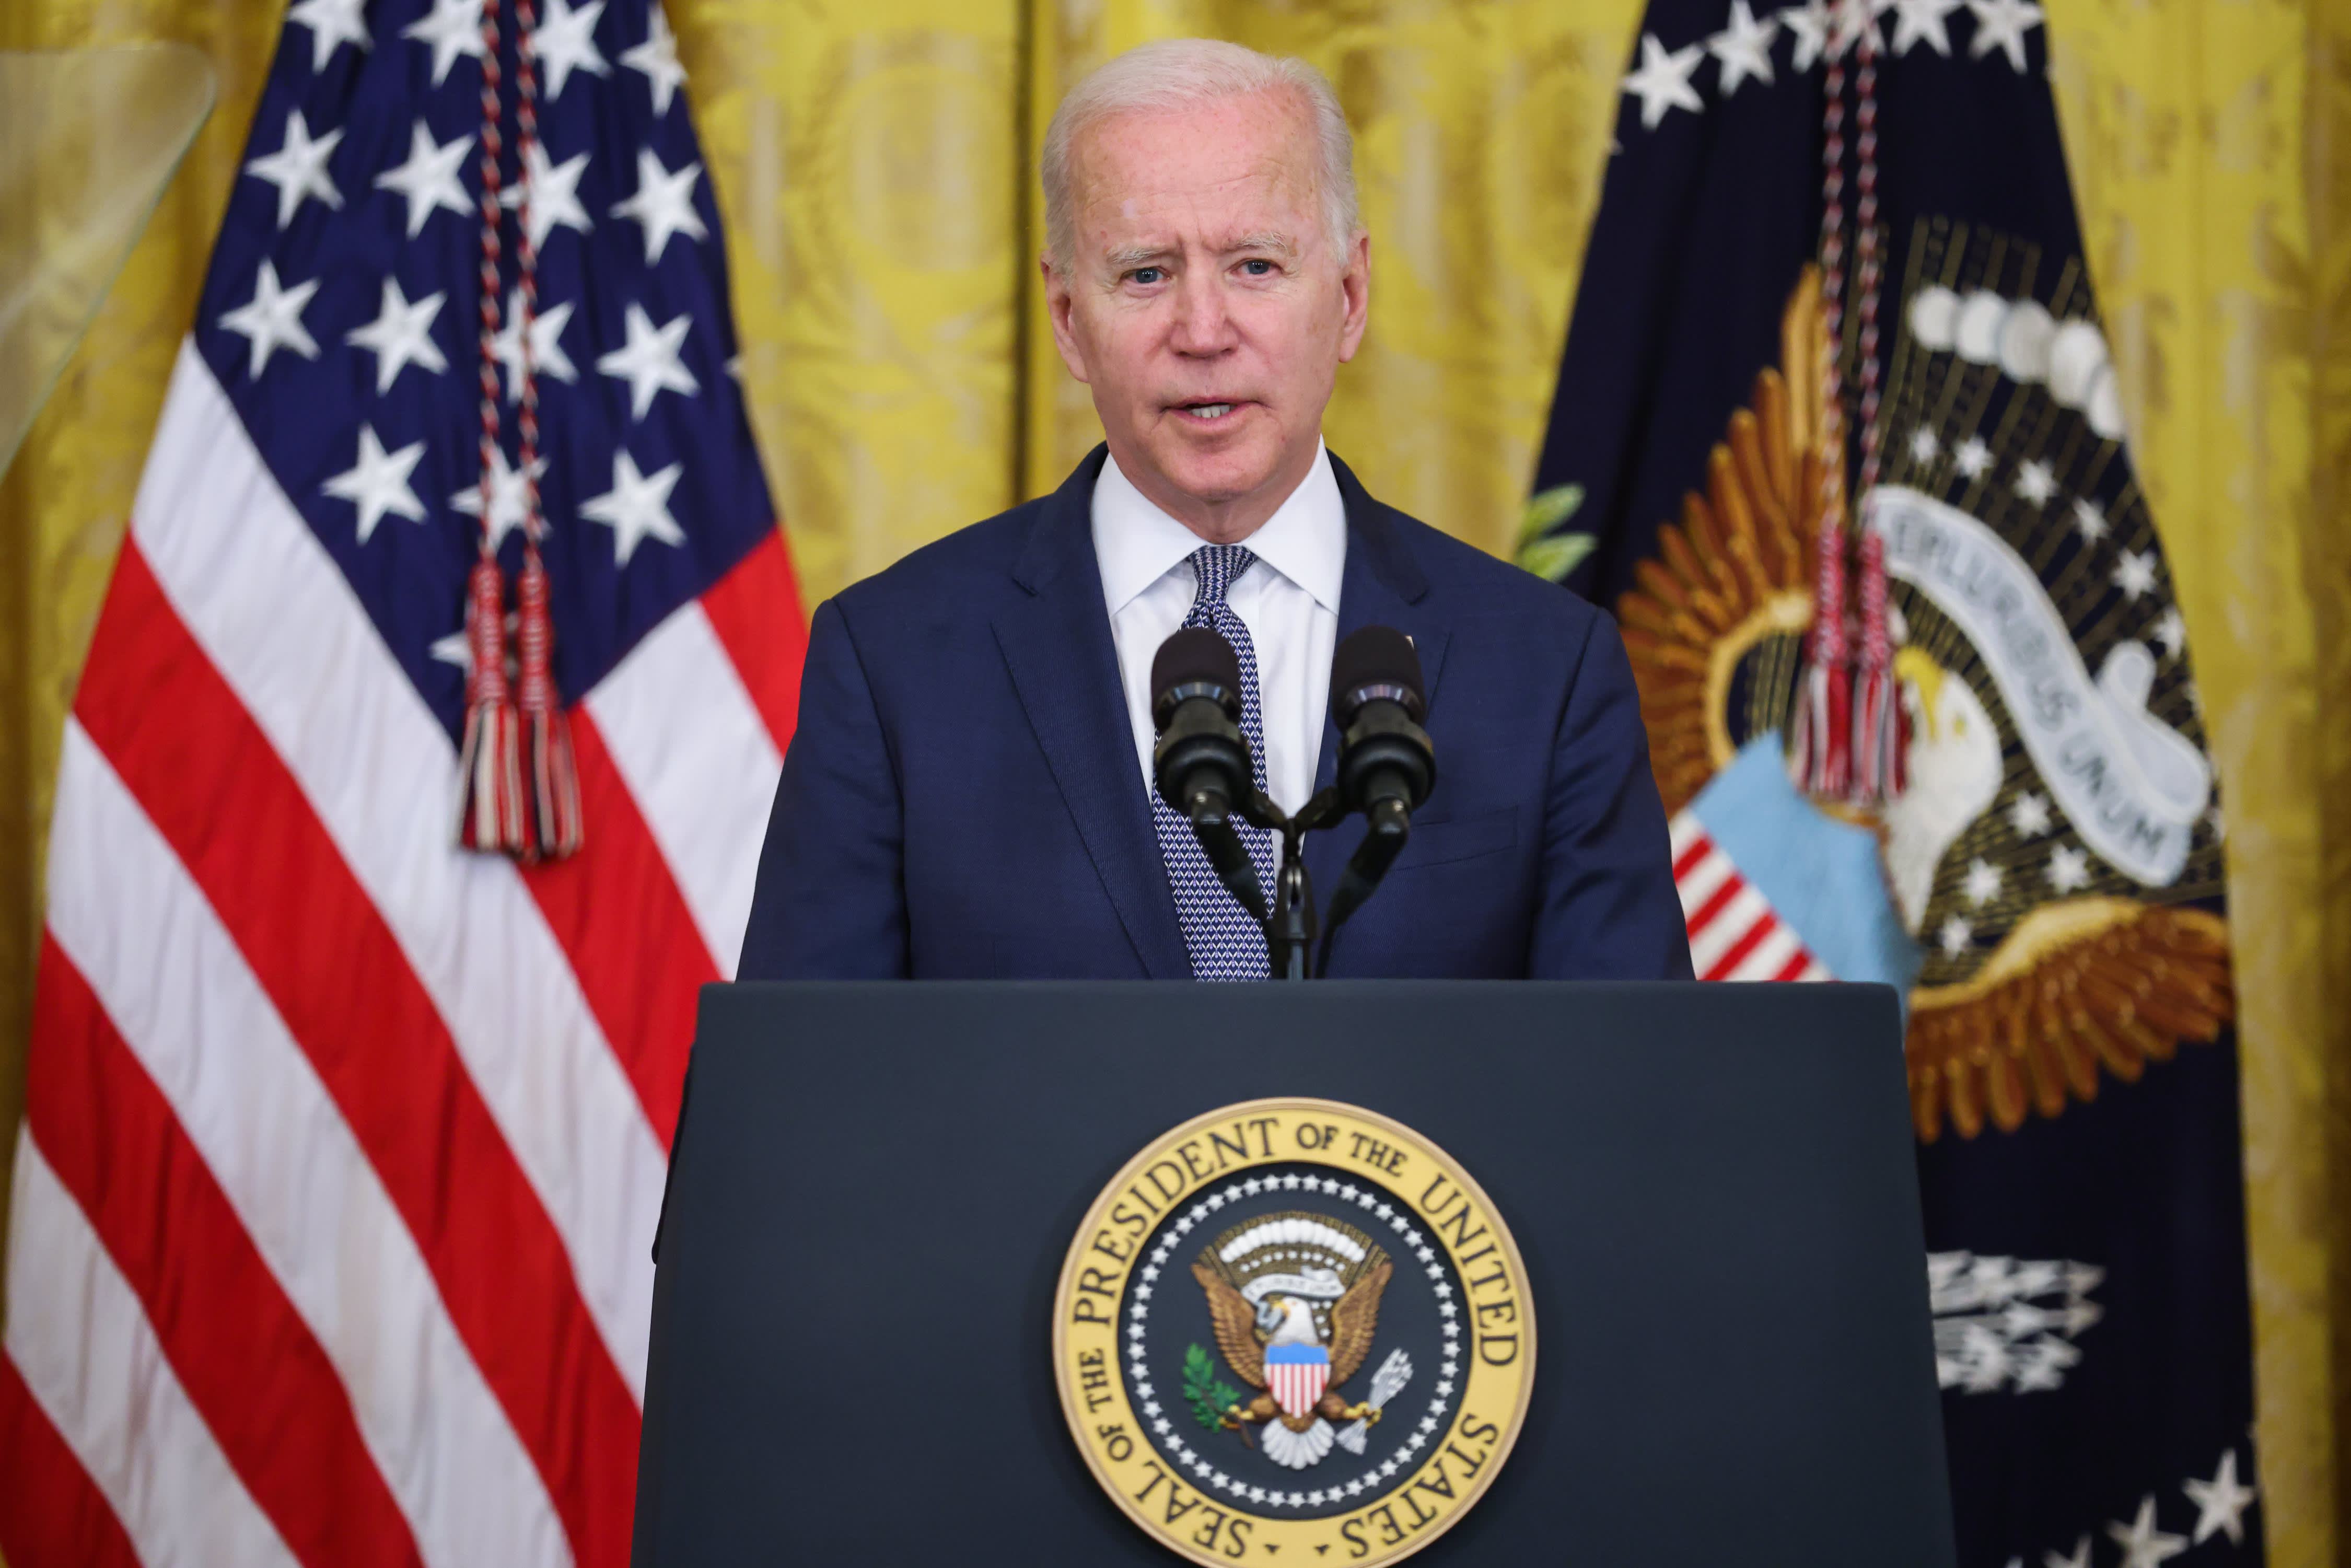 Biden's top tax rate on capital gains, dividends would be among highest in developed world